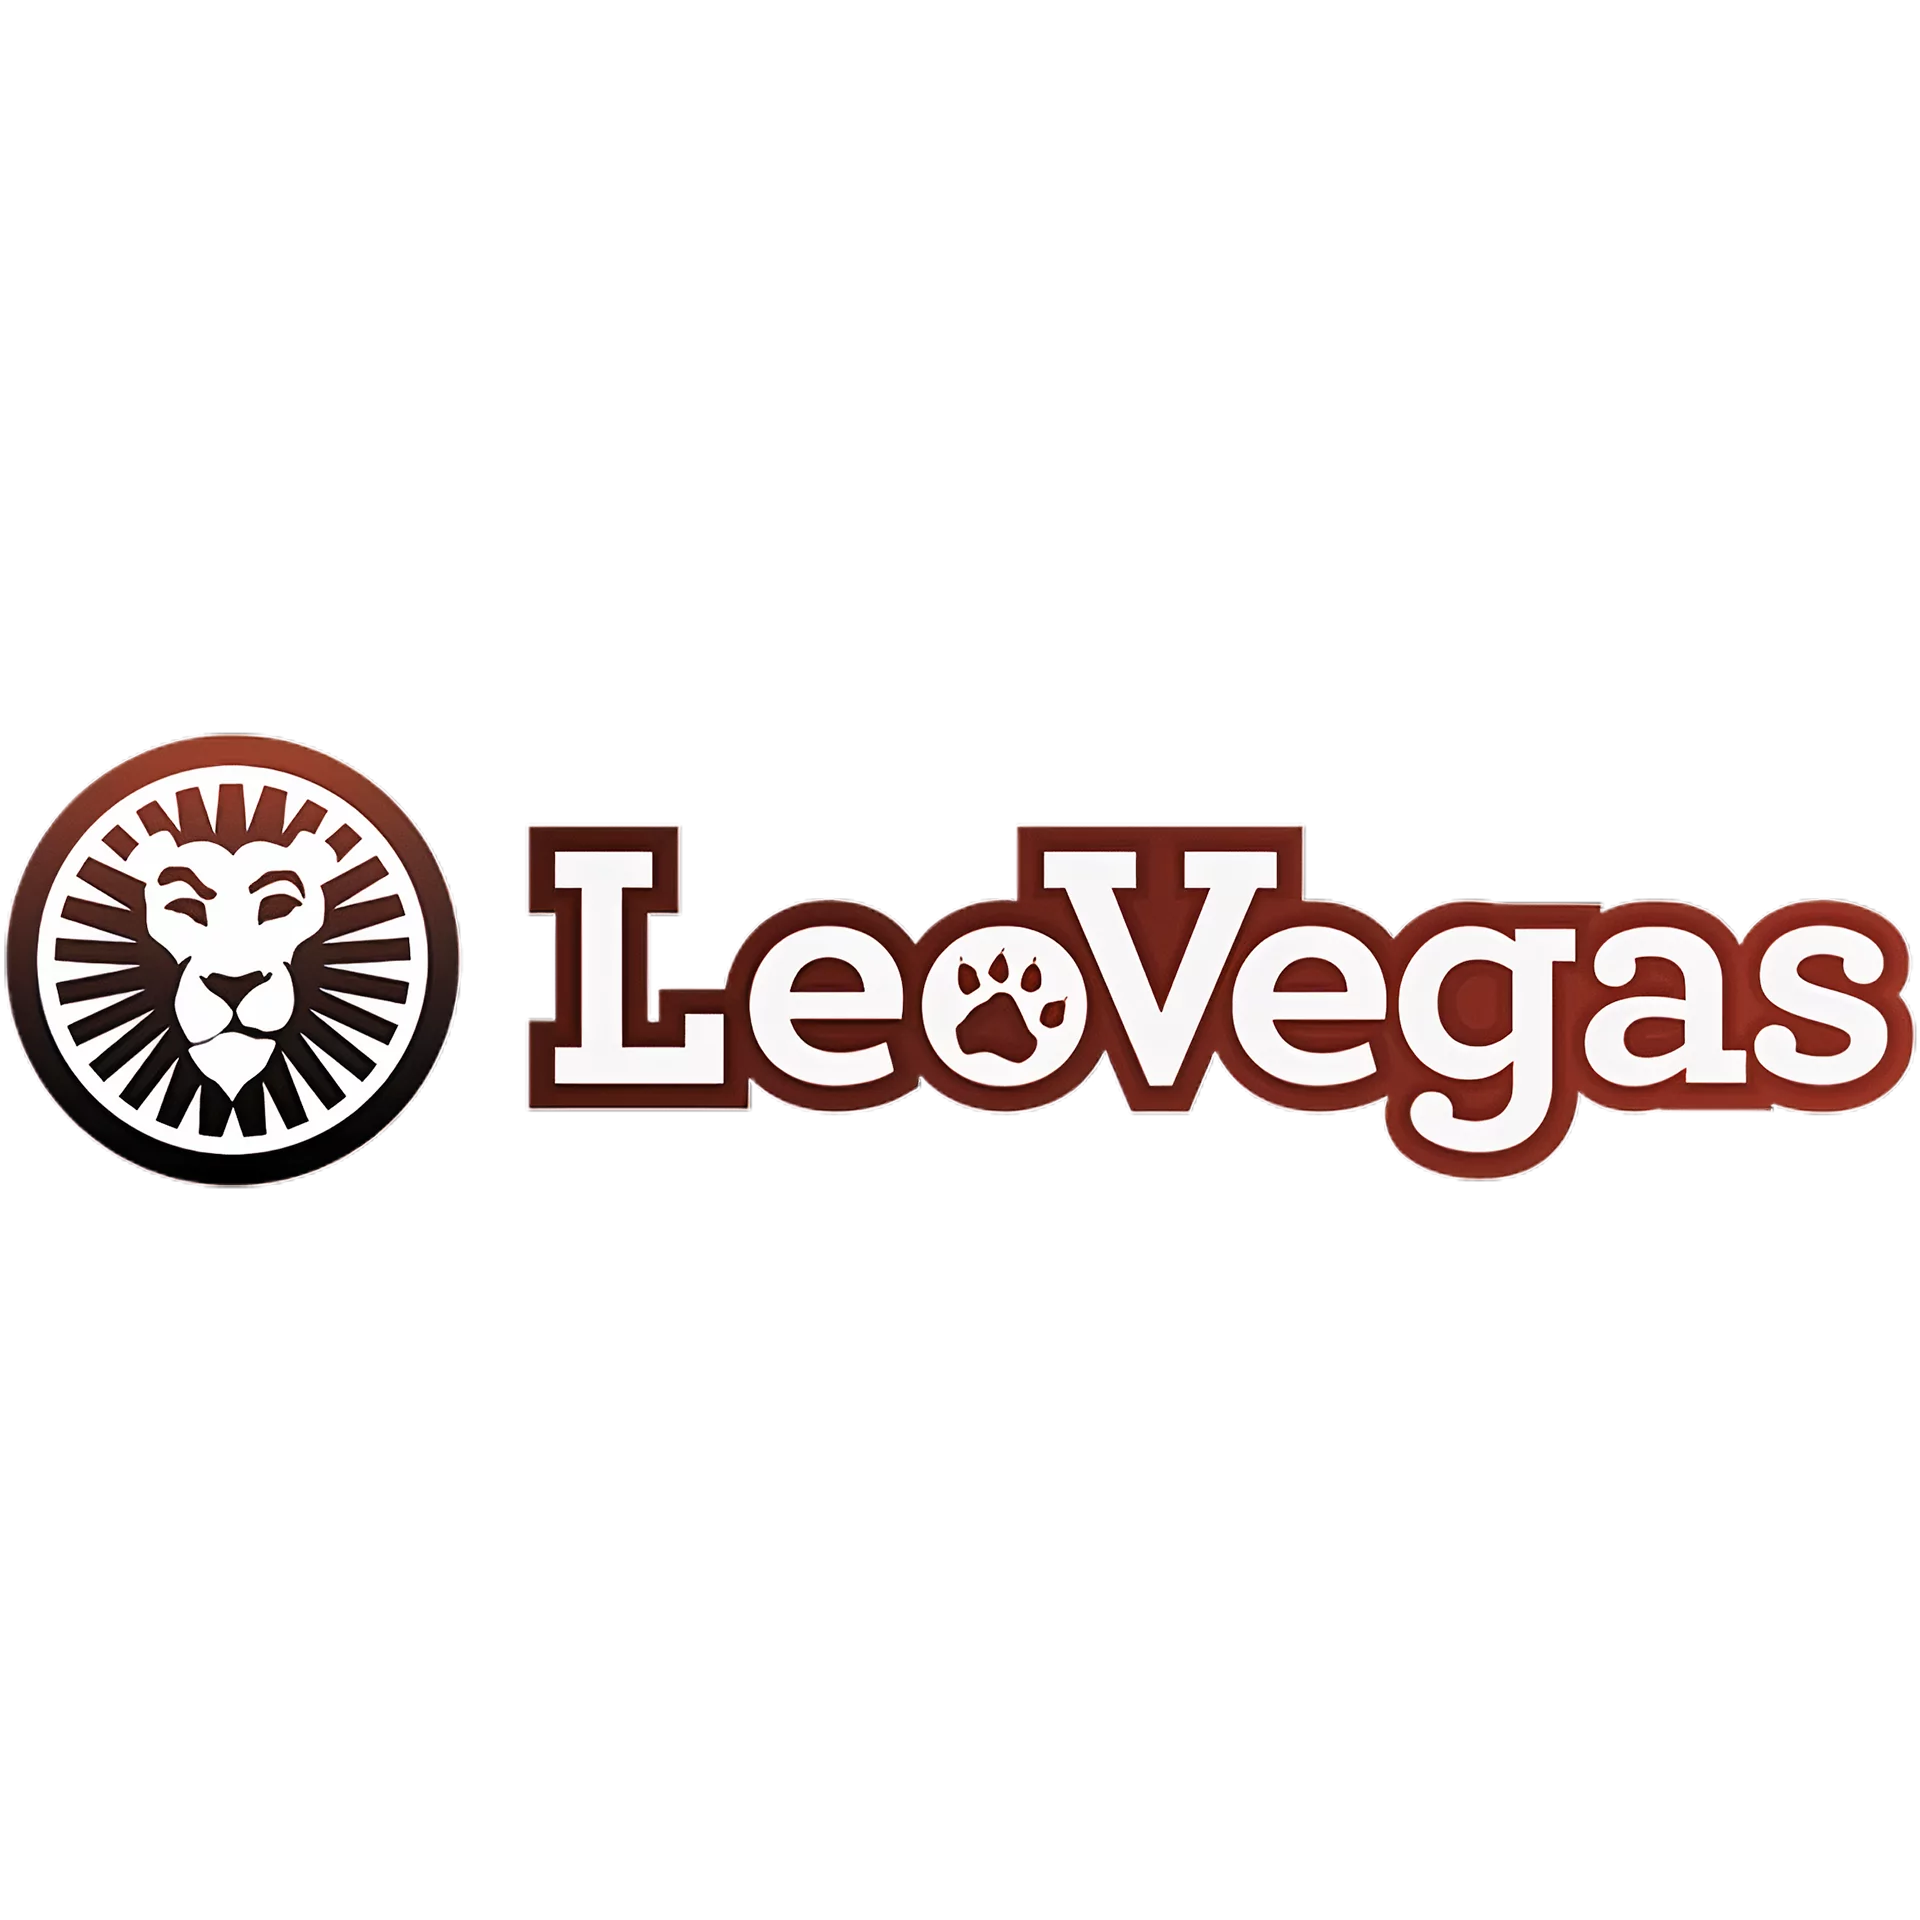 Leovegas most of all works with casino and betting fans from India.